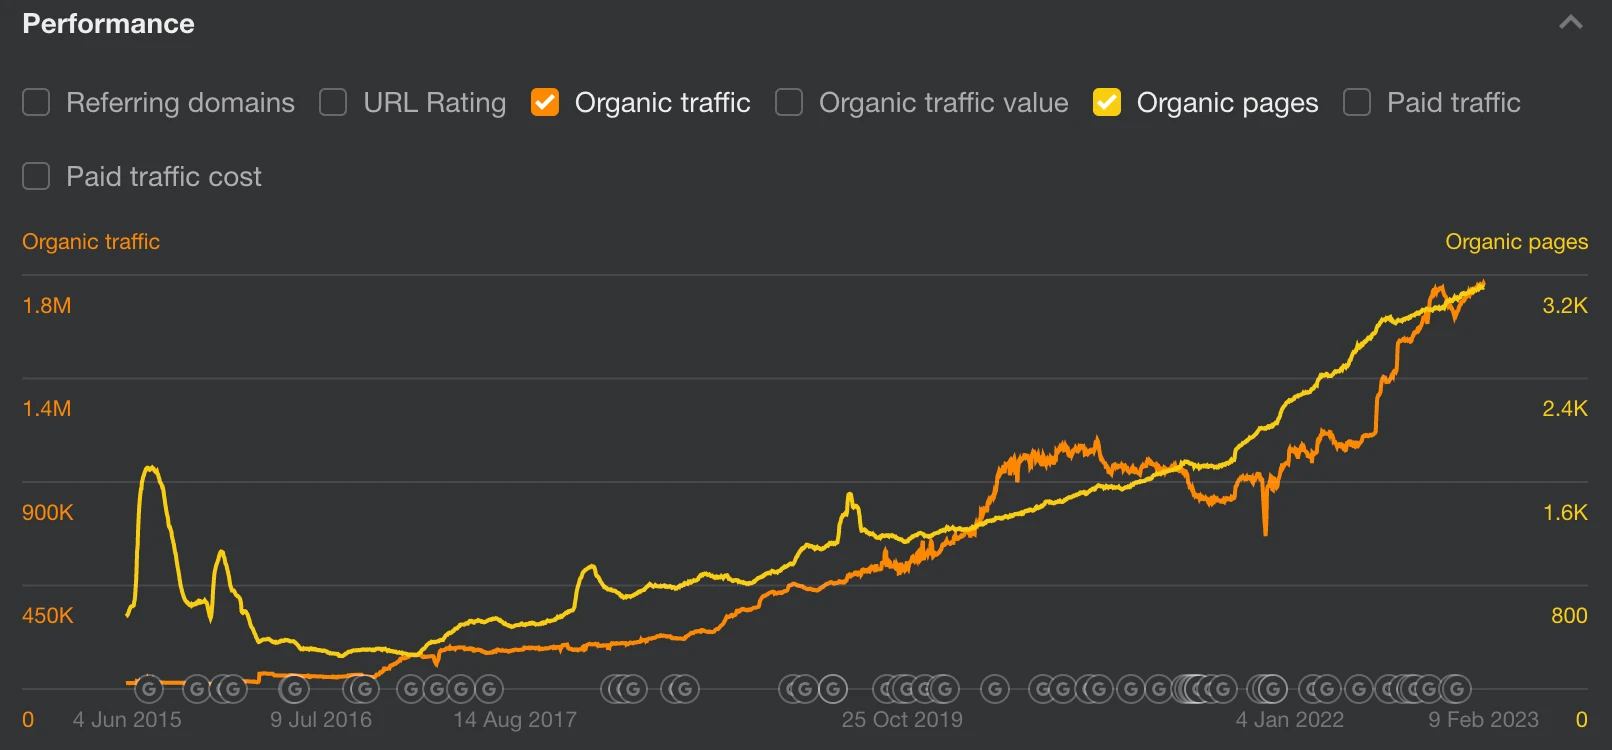 Organic traffic linear relationship with organic pages